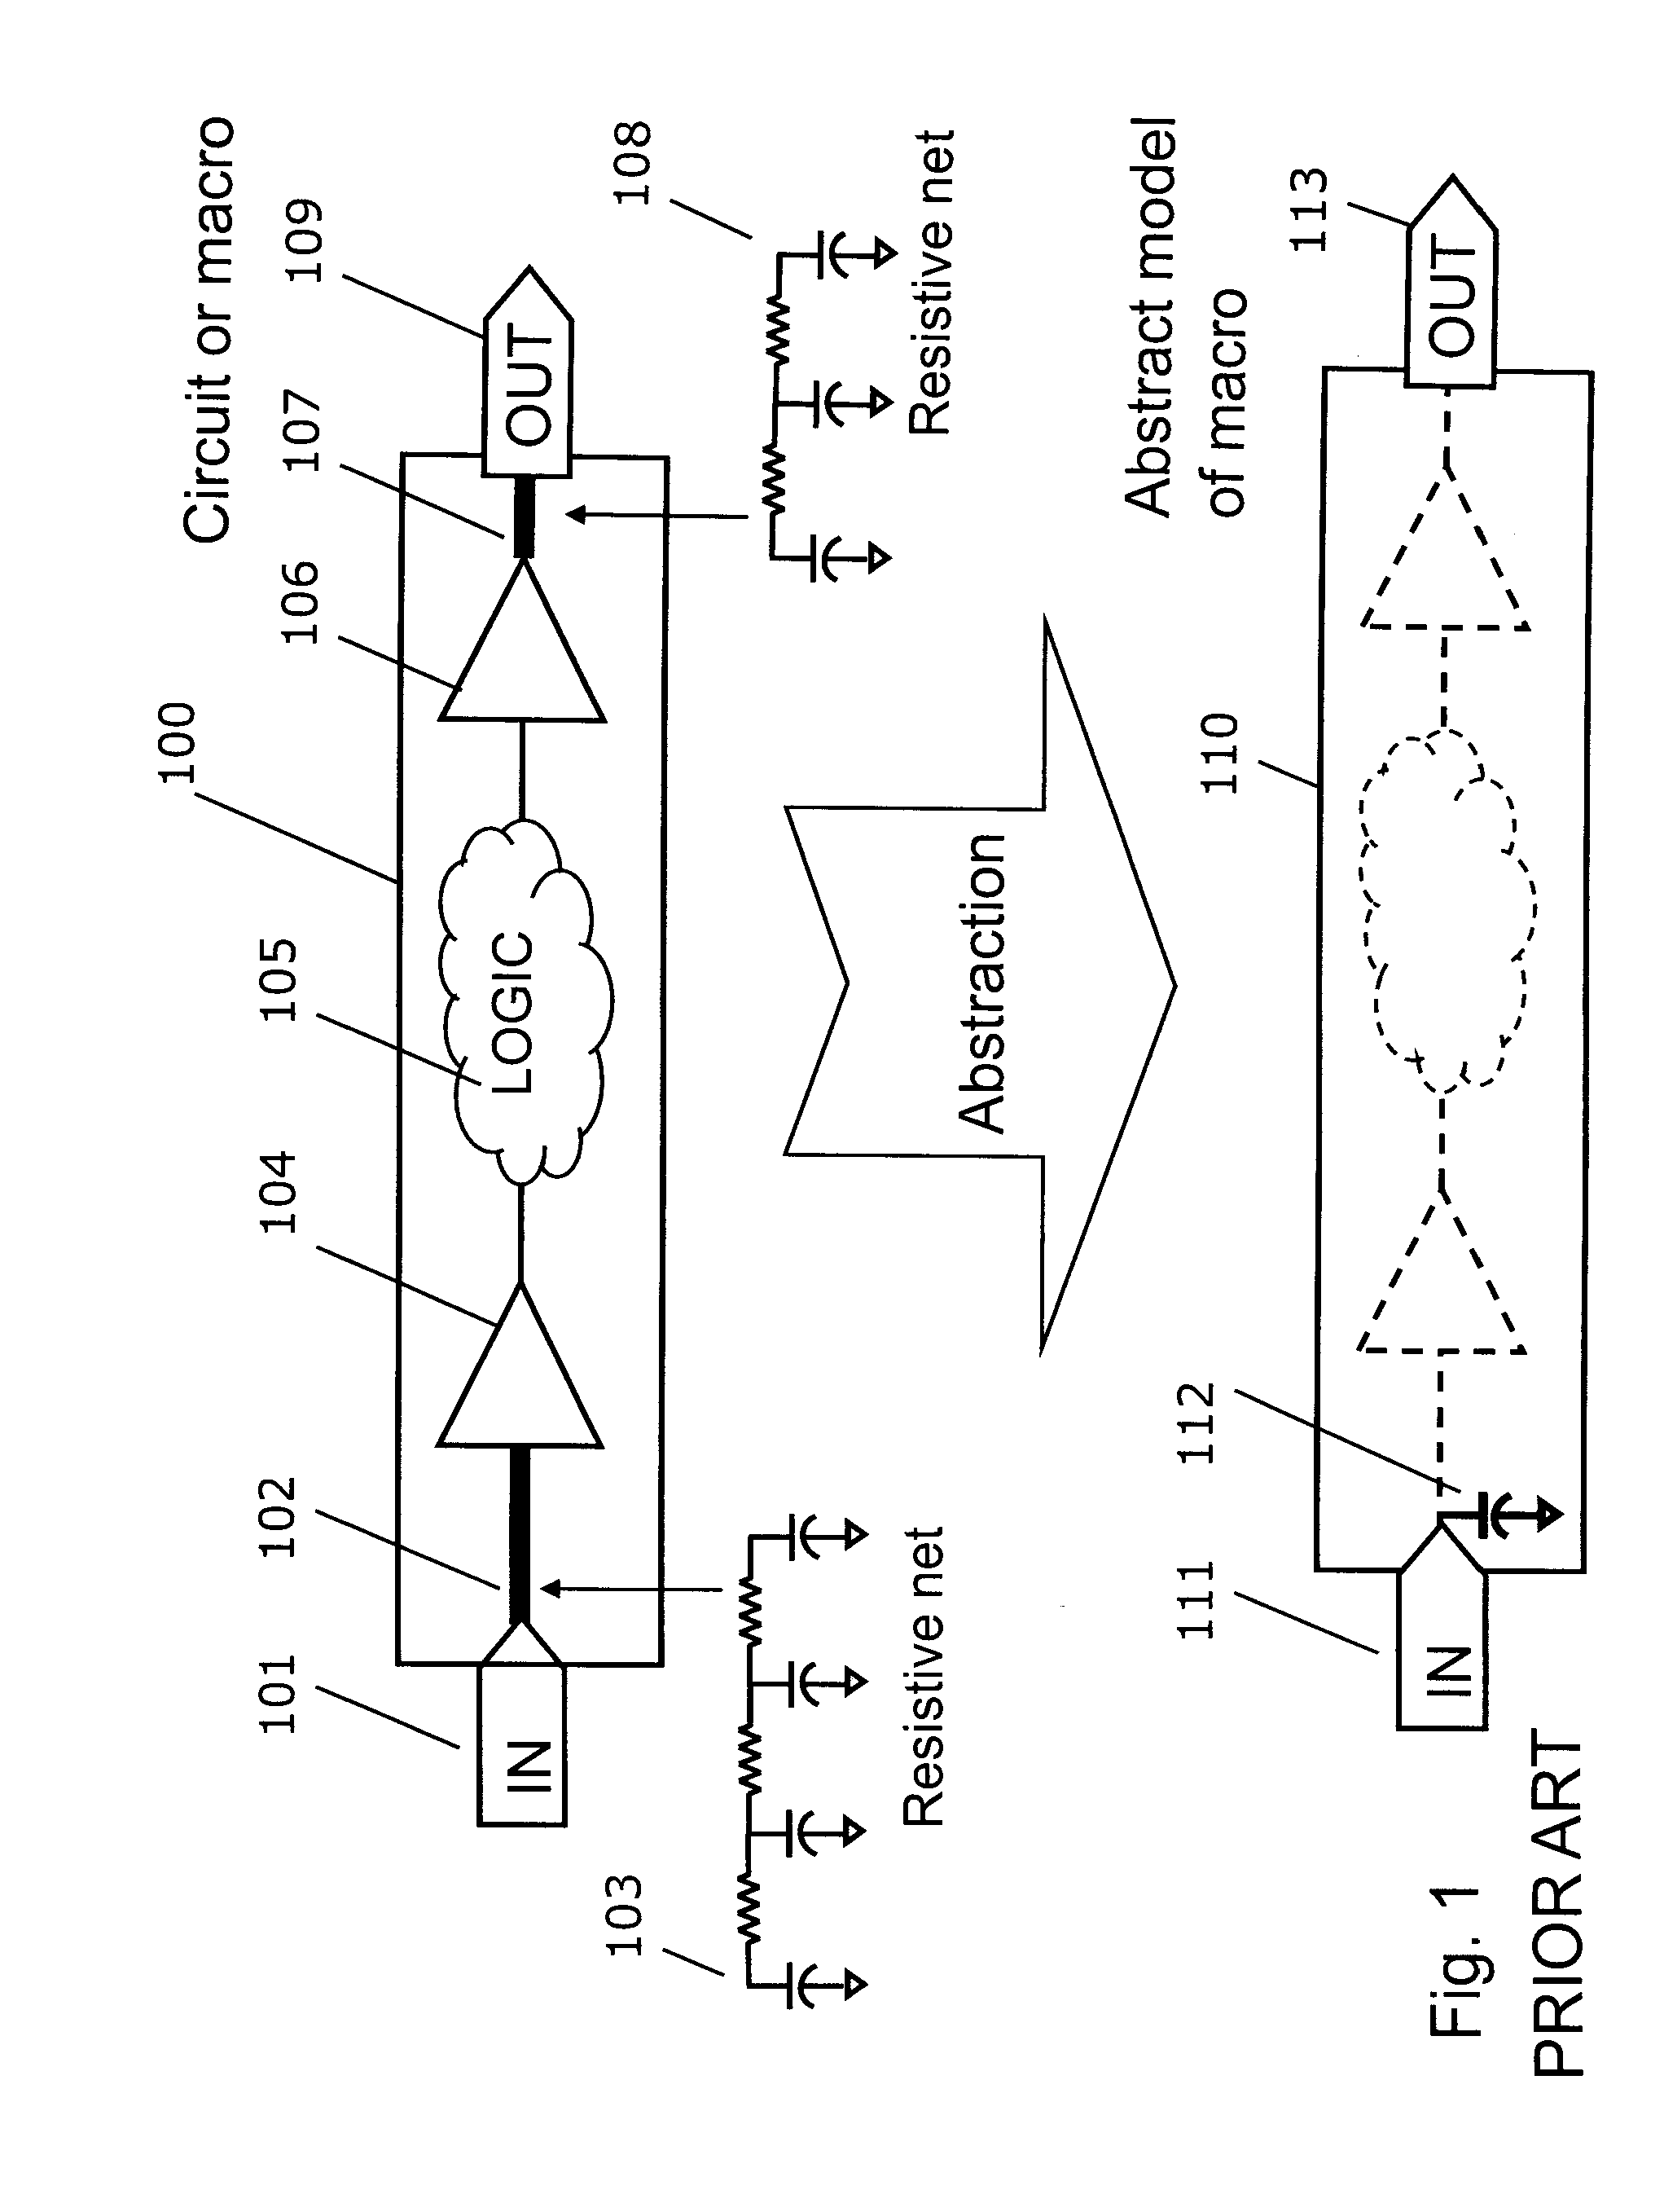 Method of Performing Static Timing Analysis Considering Abstracted Cell's Interconnect Parasitics